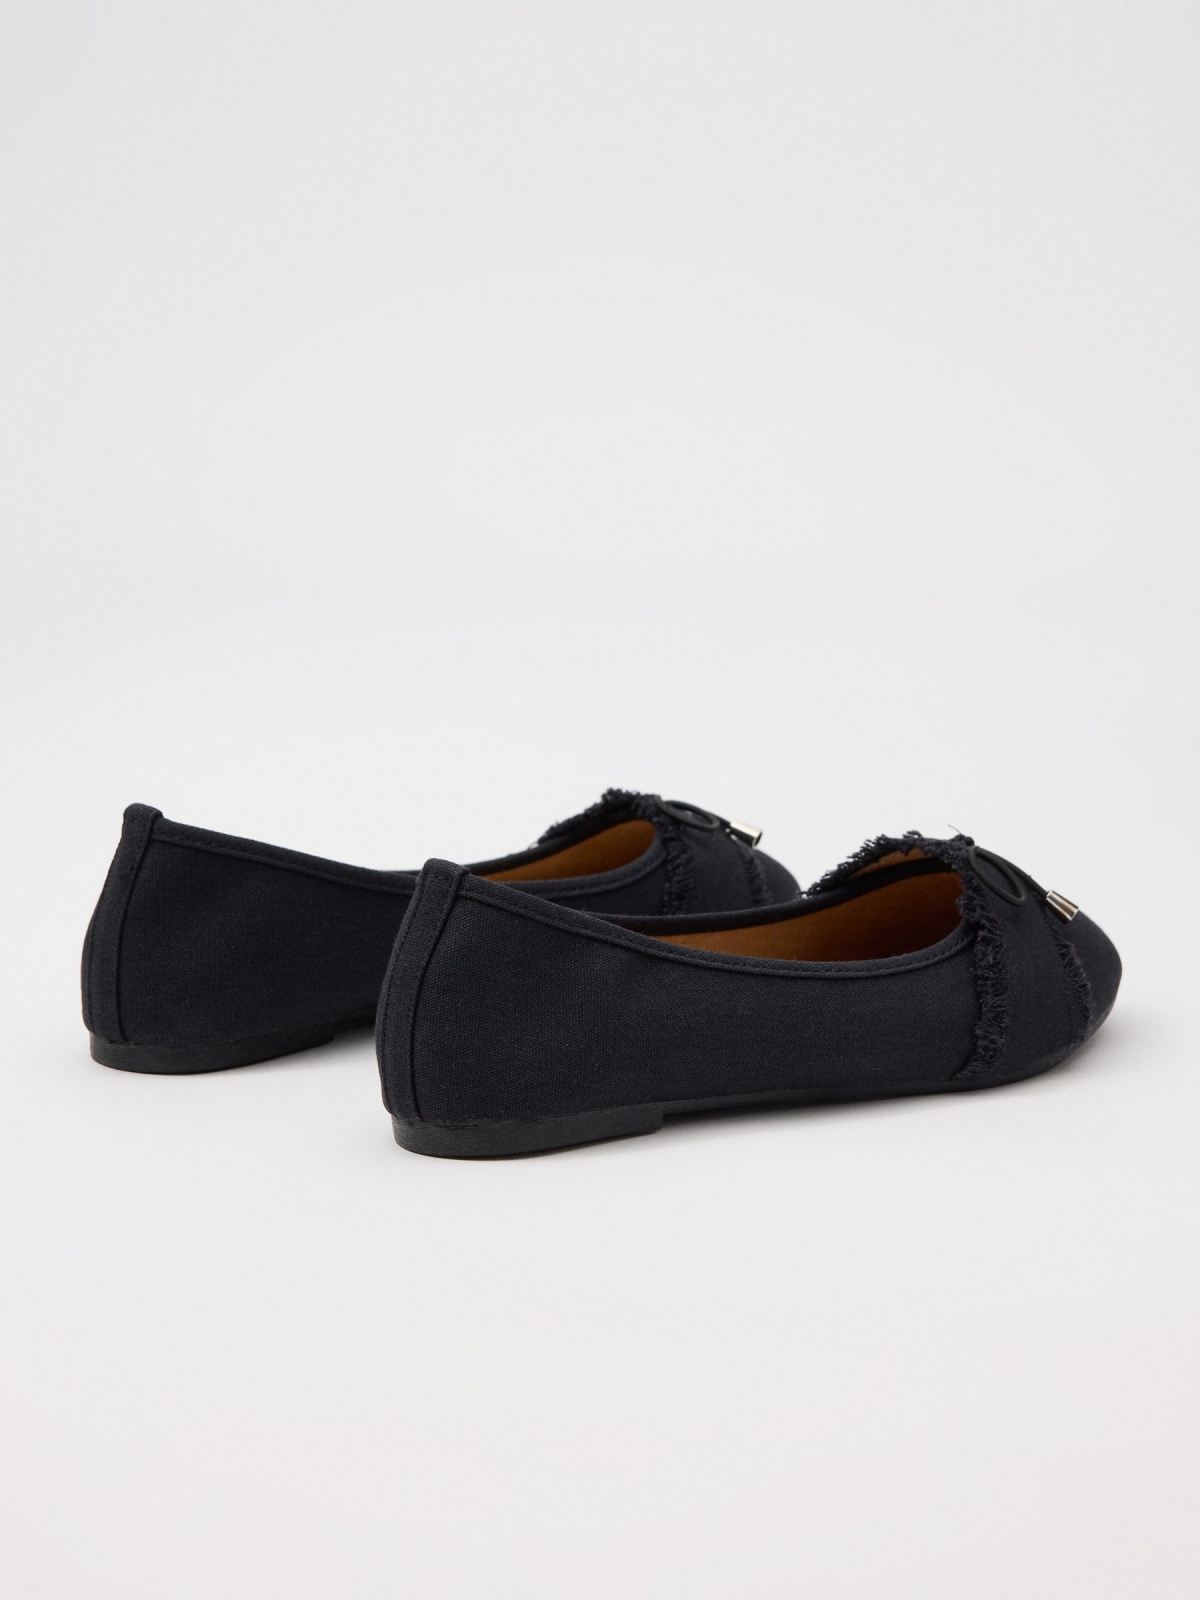 canvas ballerina with bow black 45º back view